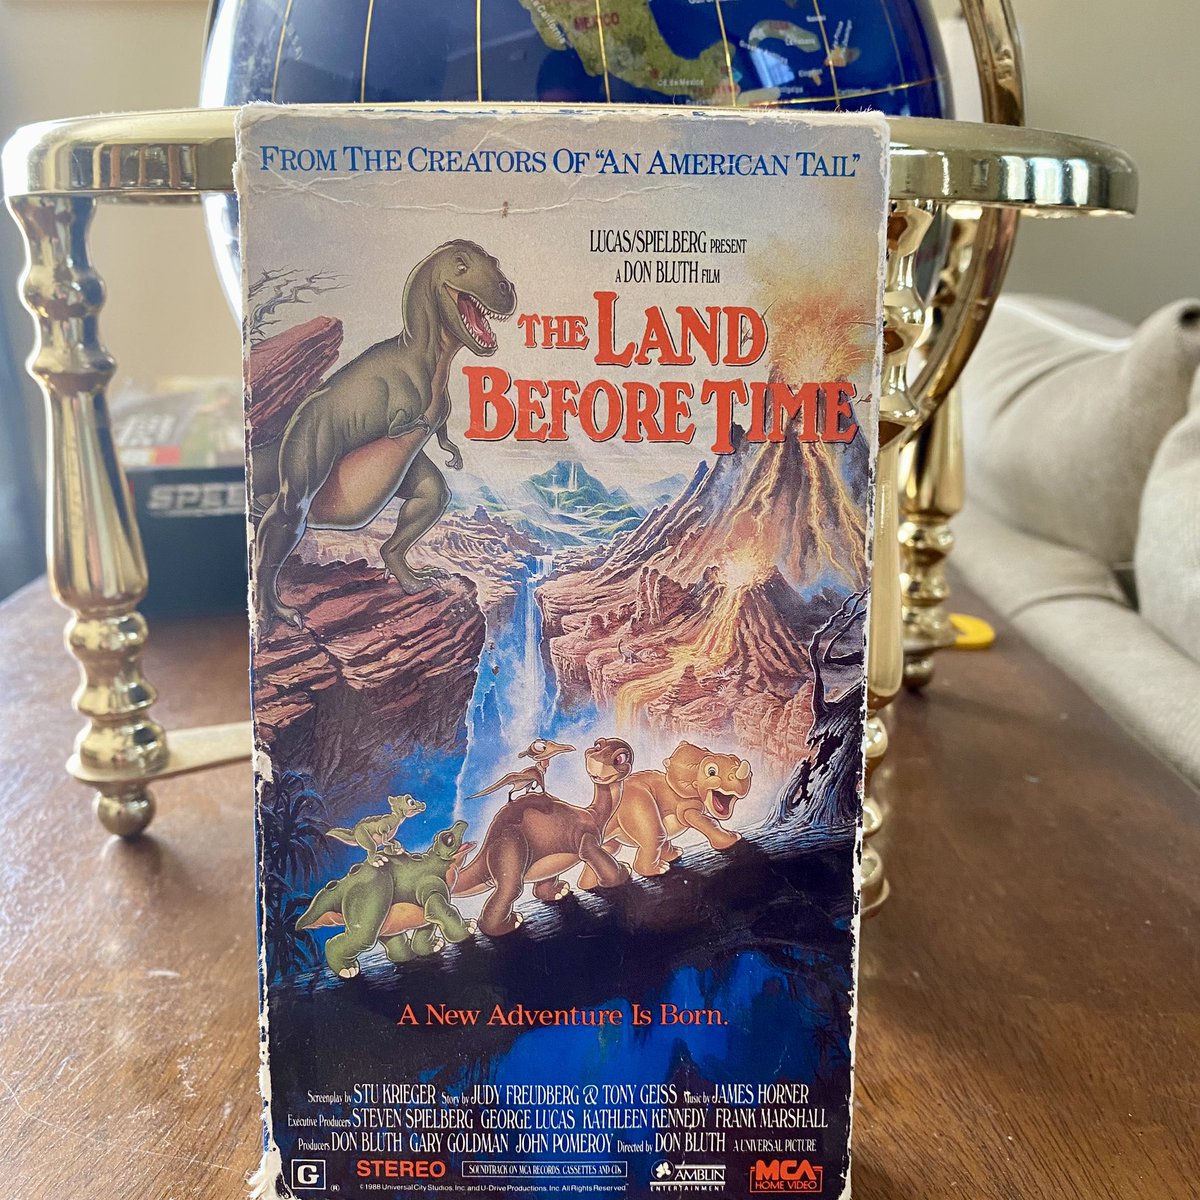 One of my favorite animated movies was released 35 years ago yesterday: #TheLandBeforeTime. Heartwarming, sad & society-mirroring adventures of unexpected dinosaur friendships among Littlefoot, Spike, Cera, Ducky & Petrie searching for The Great Valley. A VHS—yup, yup, yup! 📼 🦖